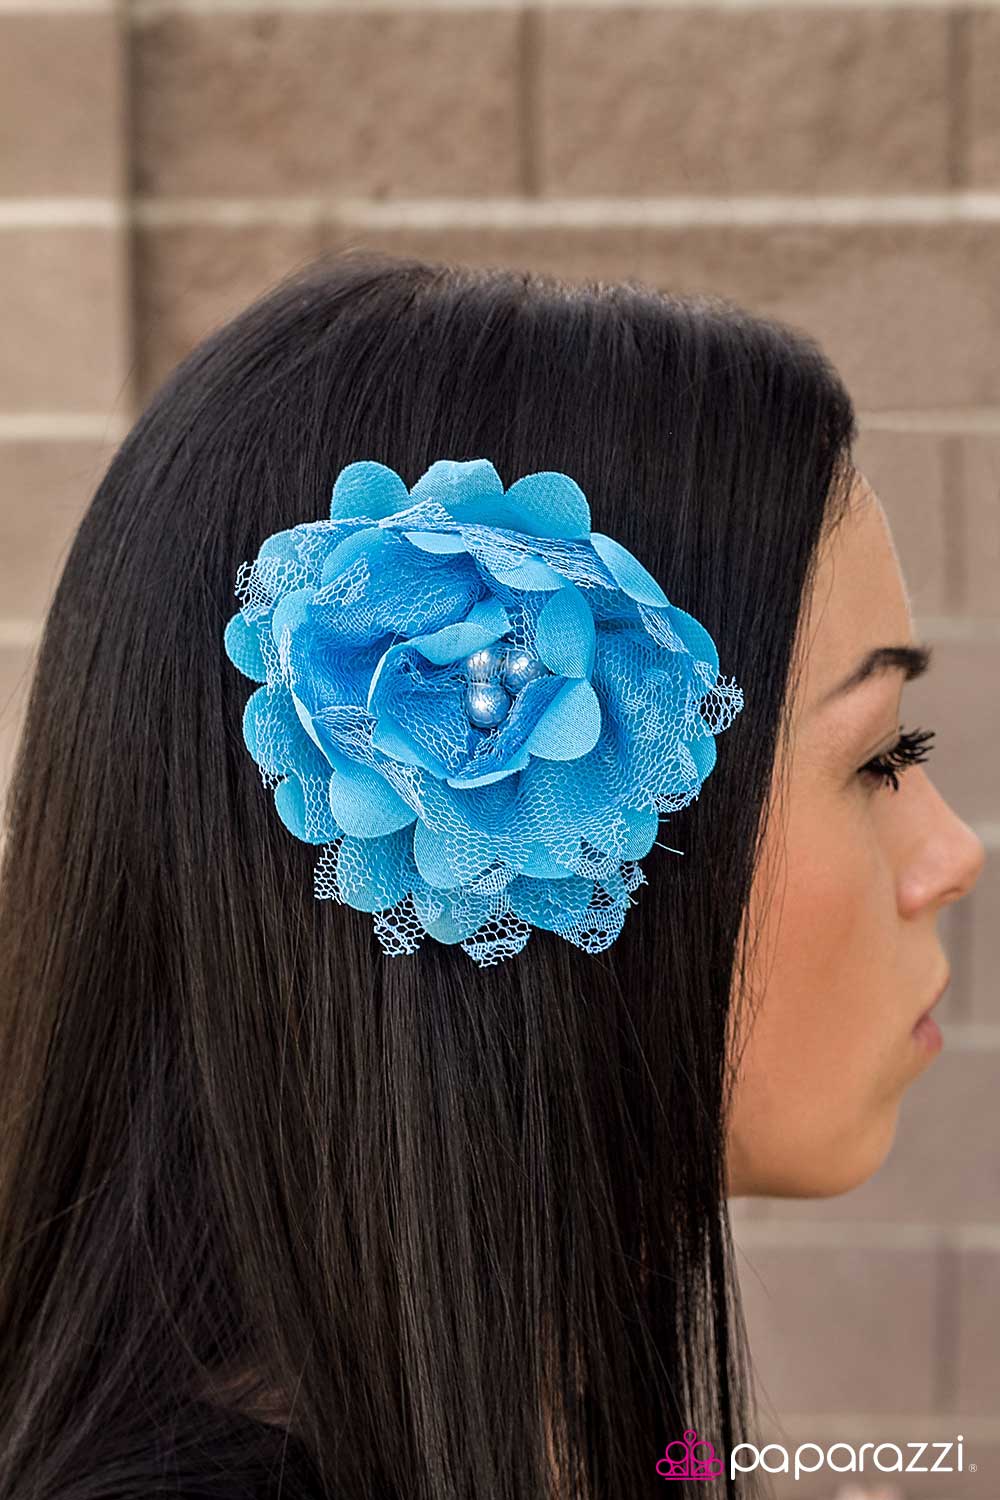 One For My Baby - Blue - Paparazzi hair clip